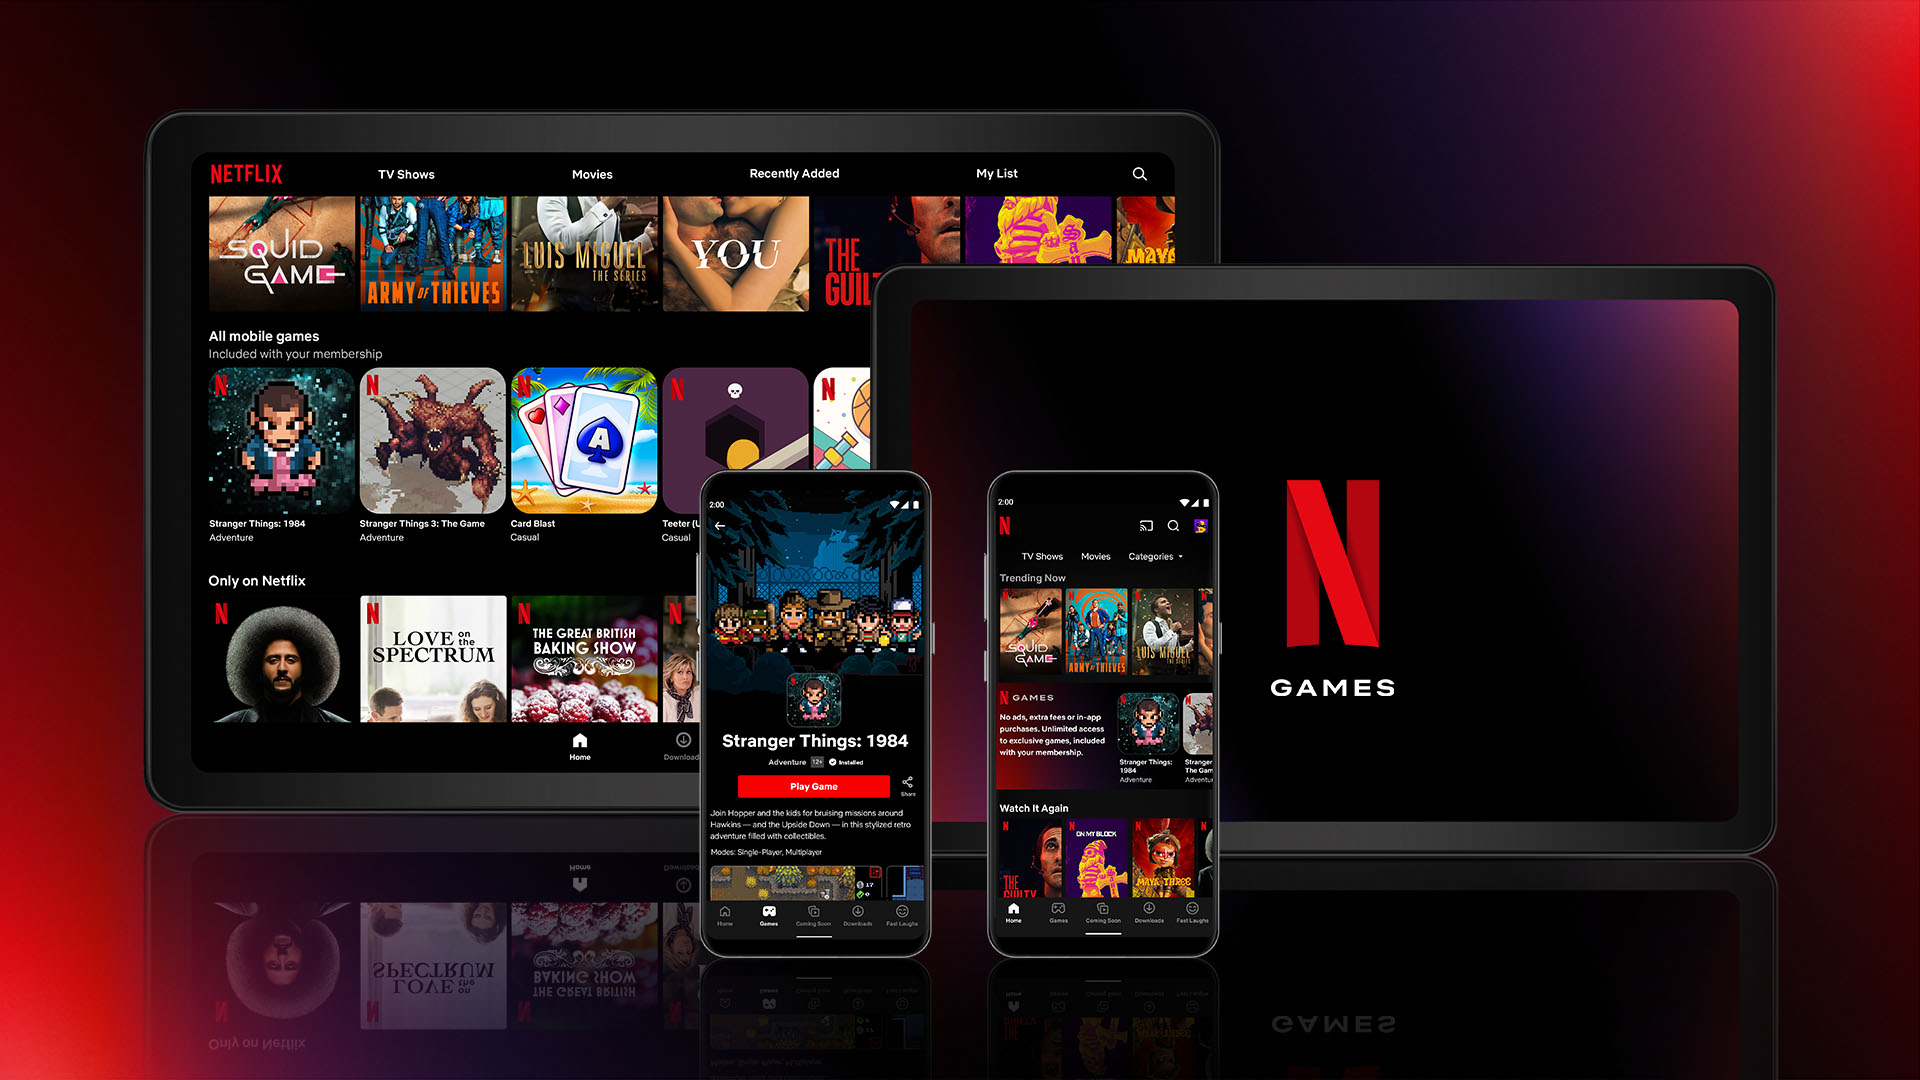 Netflix Mod Apk is by not paying for the appliance